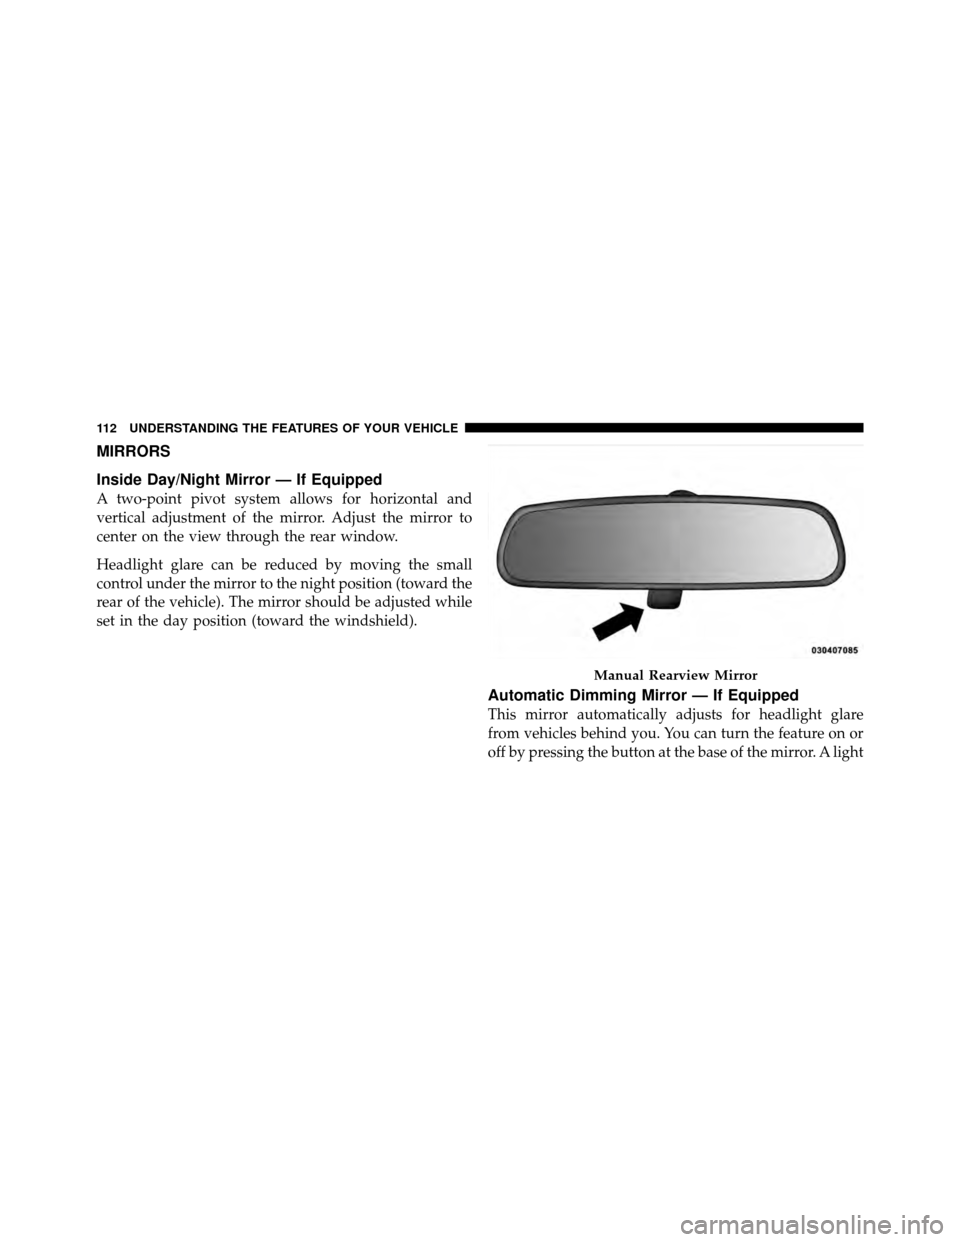 Ram Cargo Van 2012  Owners Manual MIRRORS
Inside Day/Night Mirror — If Equipped
A two-point pivot system allows for horizontal and
vertical adjustment of the mirror. Adjust the mirror to
center on the view through the rear window.
H